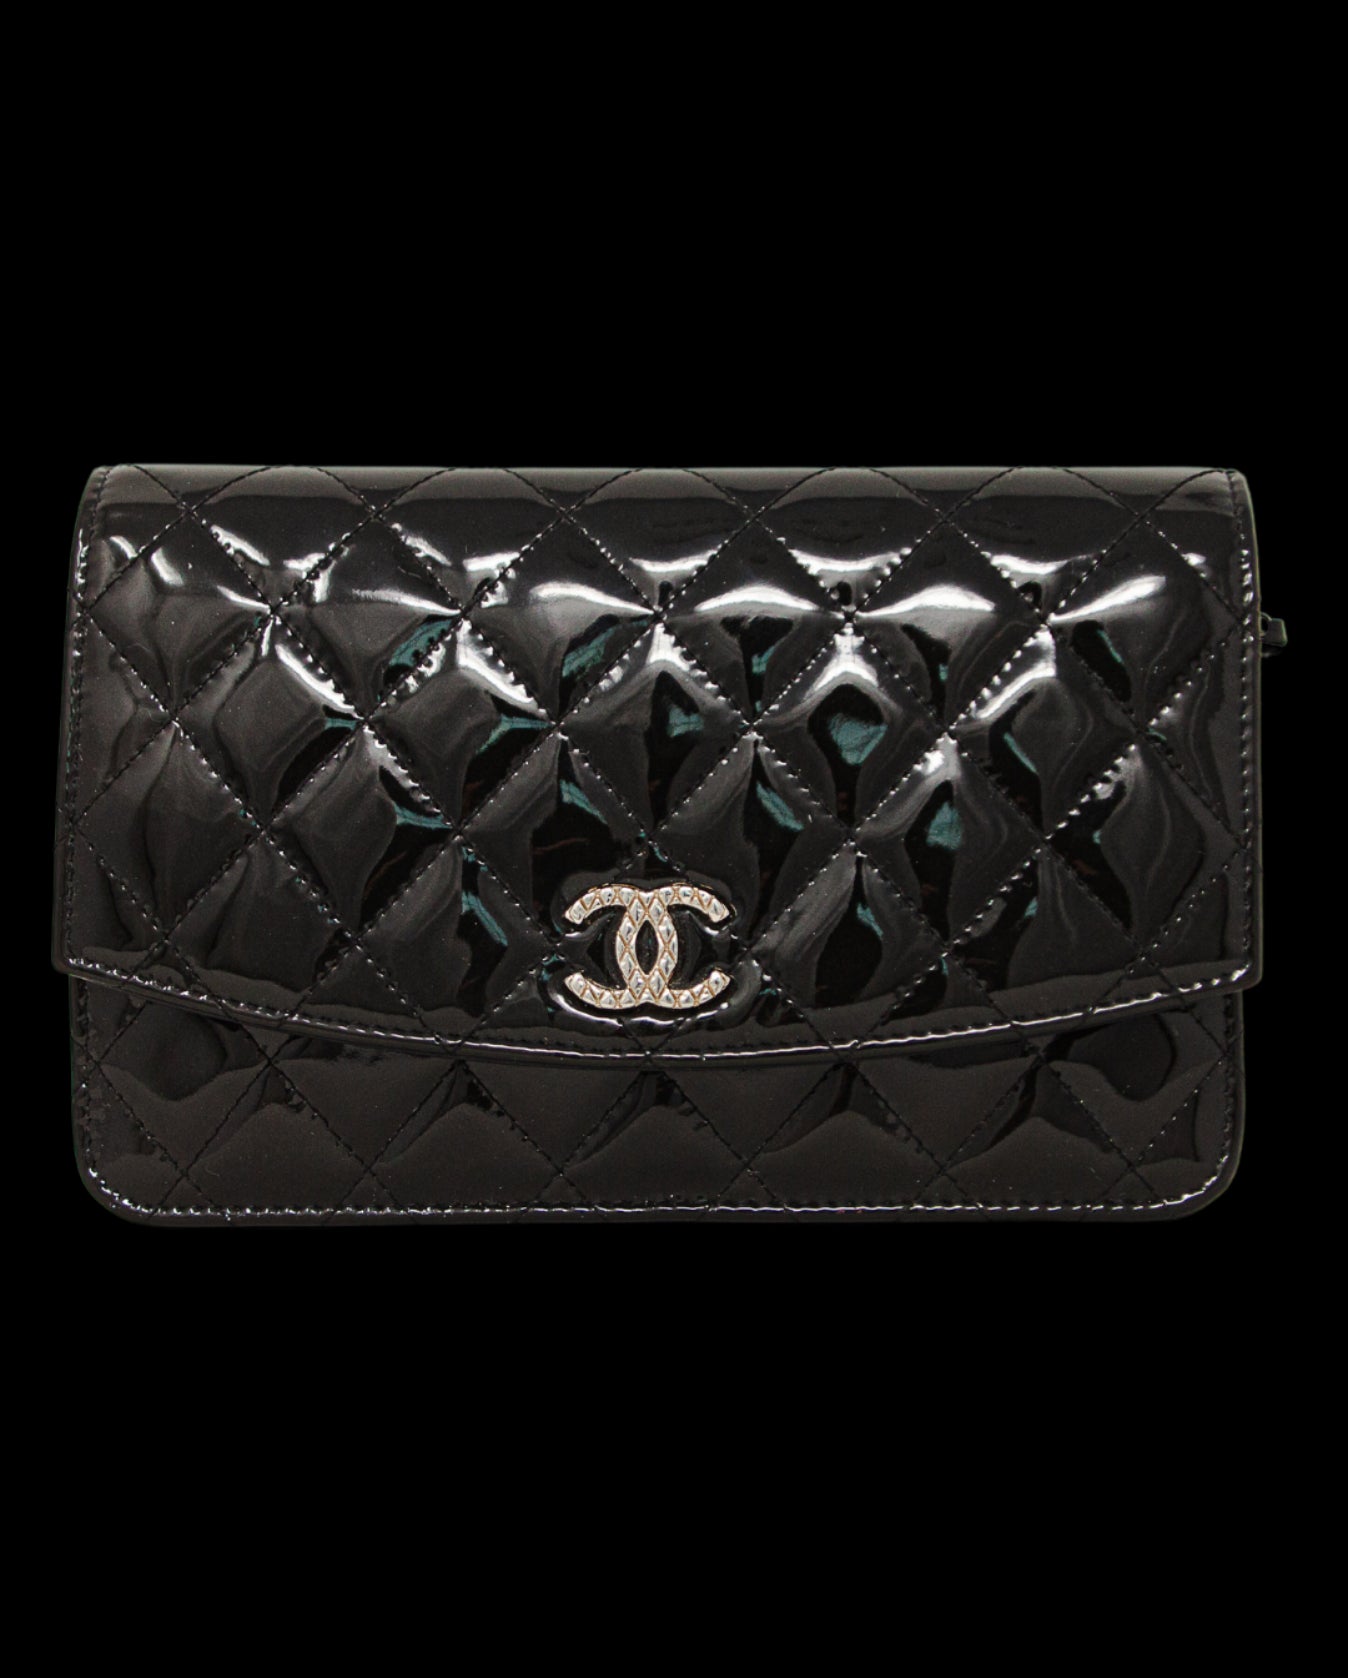 Chanel Black Quilted Patent Leather Classic WOC Clutch Bag - Yoogi's Closet